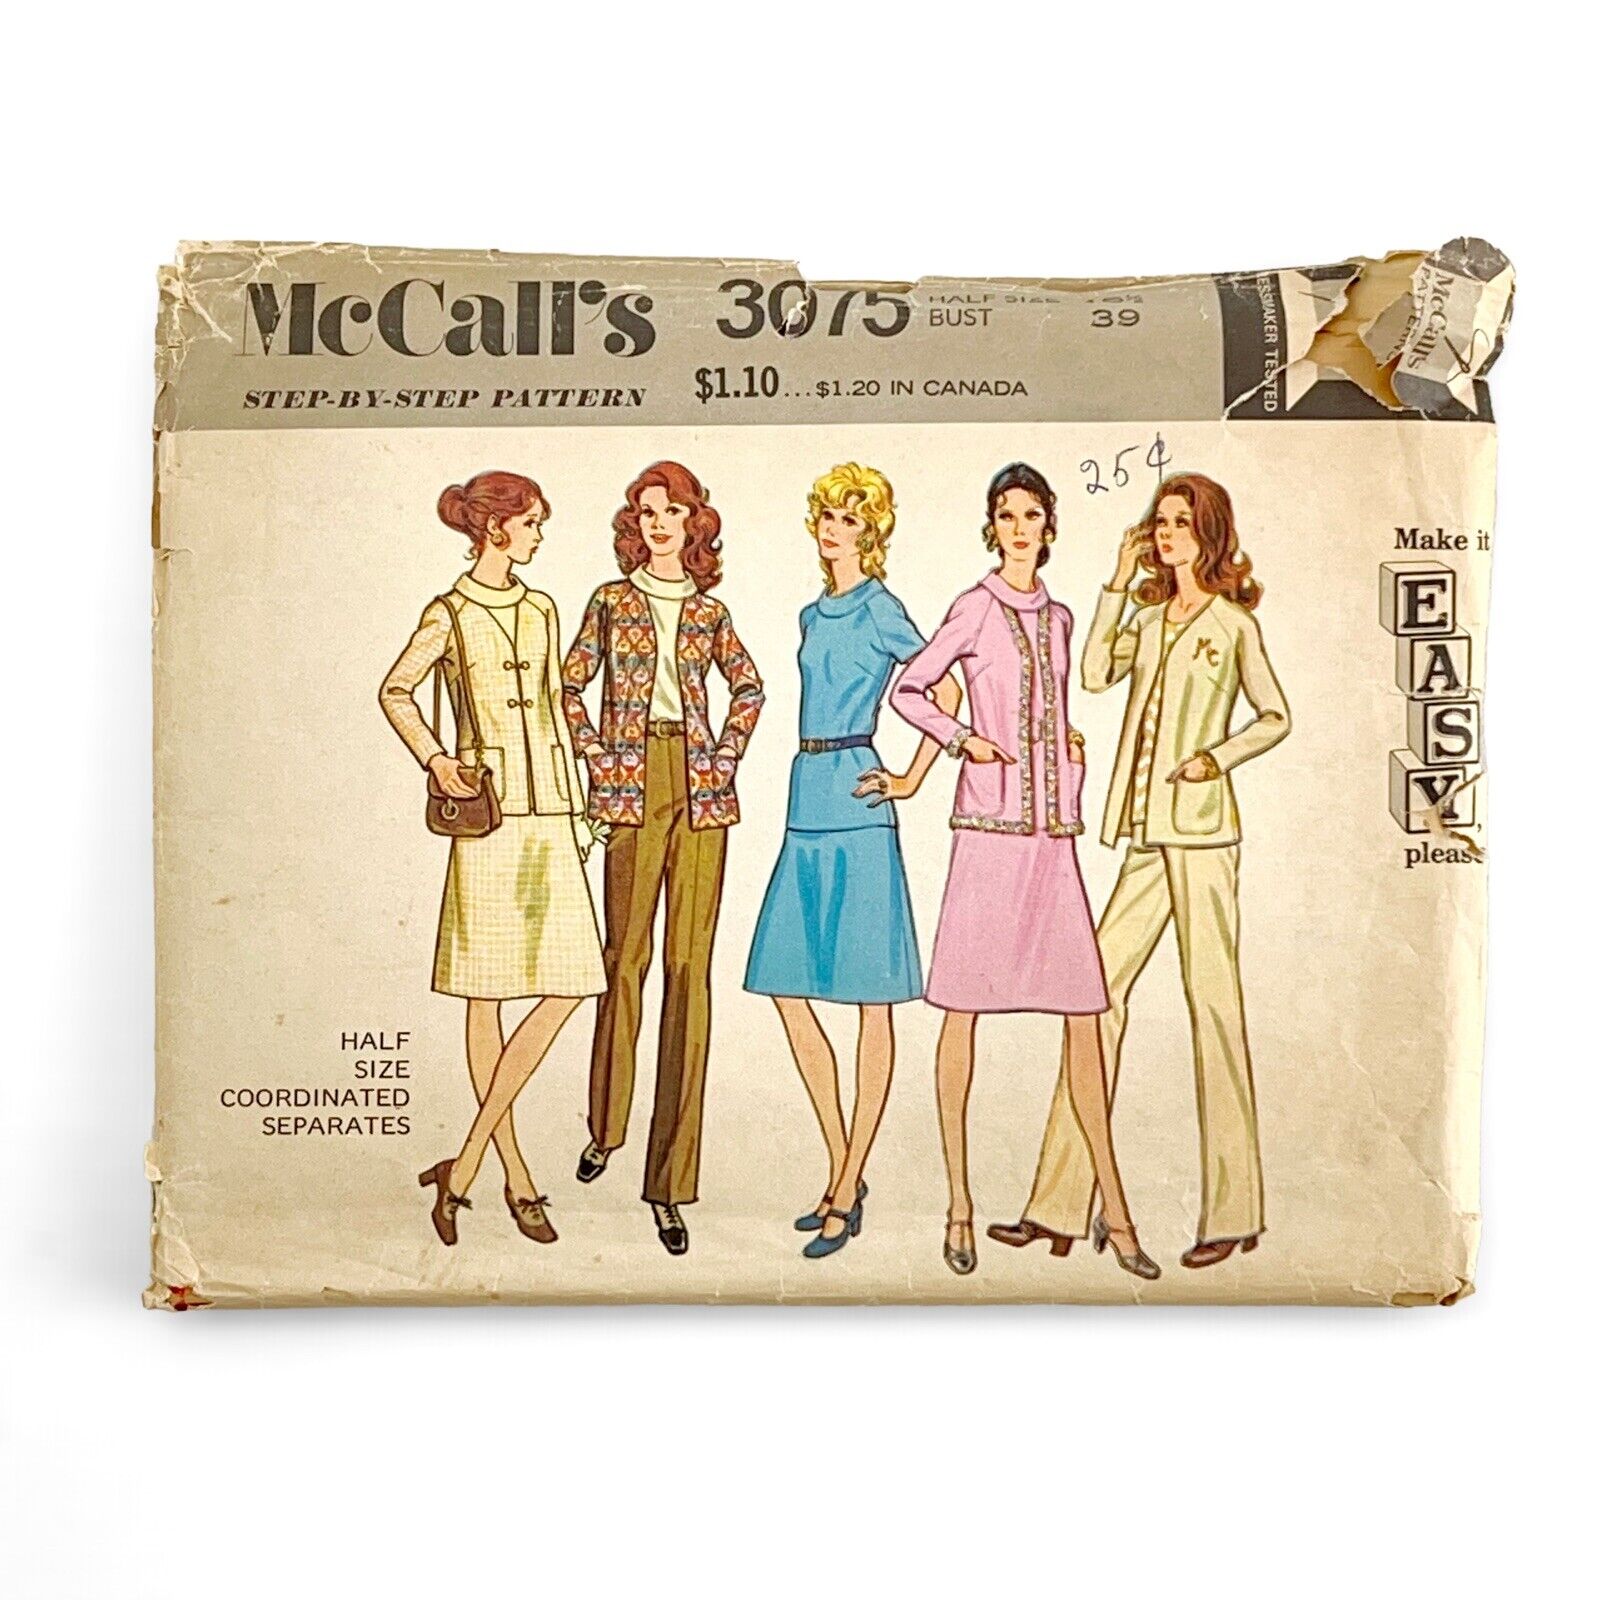 1971 McCall\'s Sewing Pattern 3075 Top Skirt Pants Jacket Size 16 1/2 Bust 41 PC